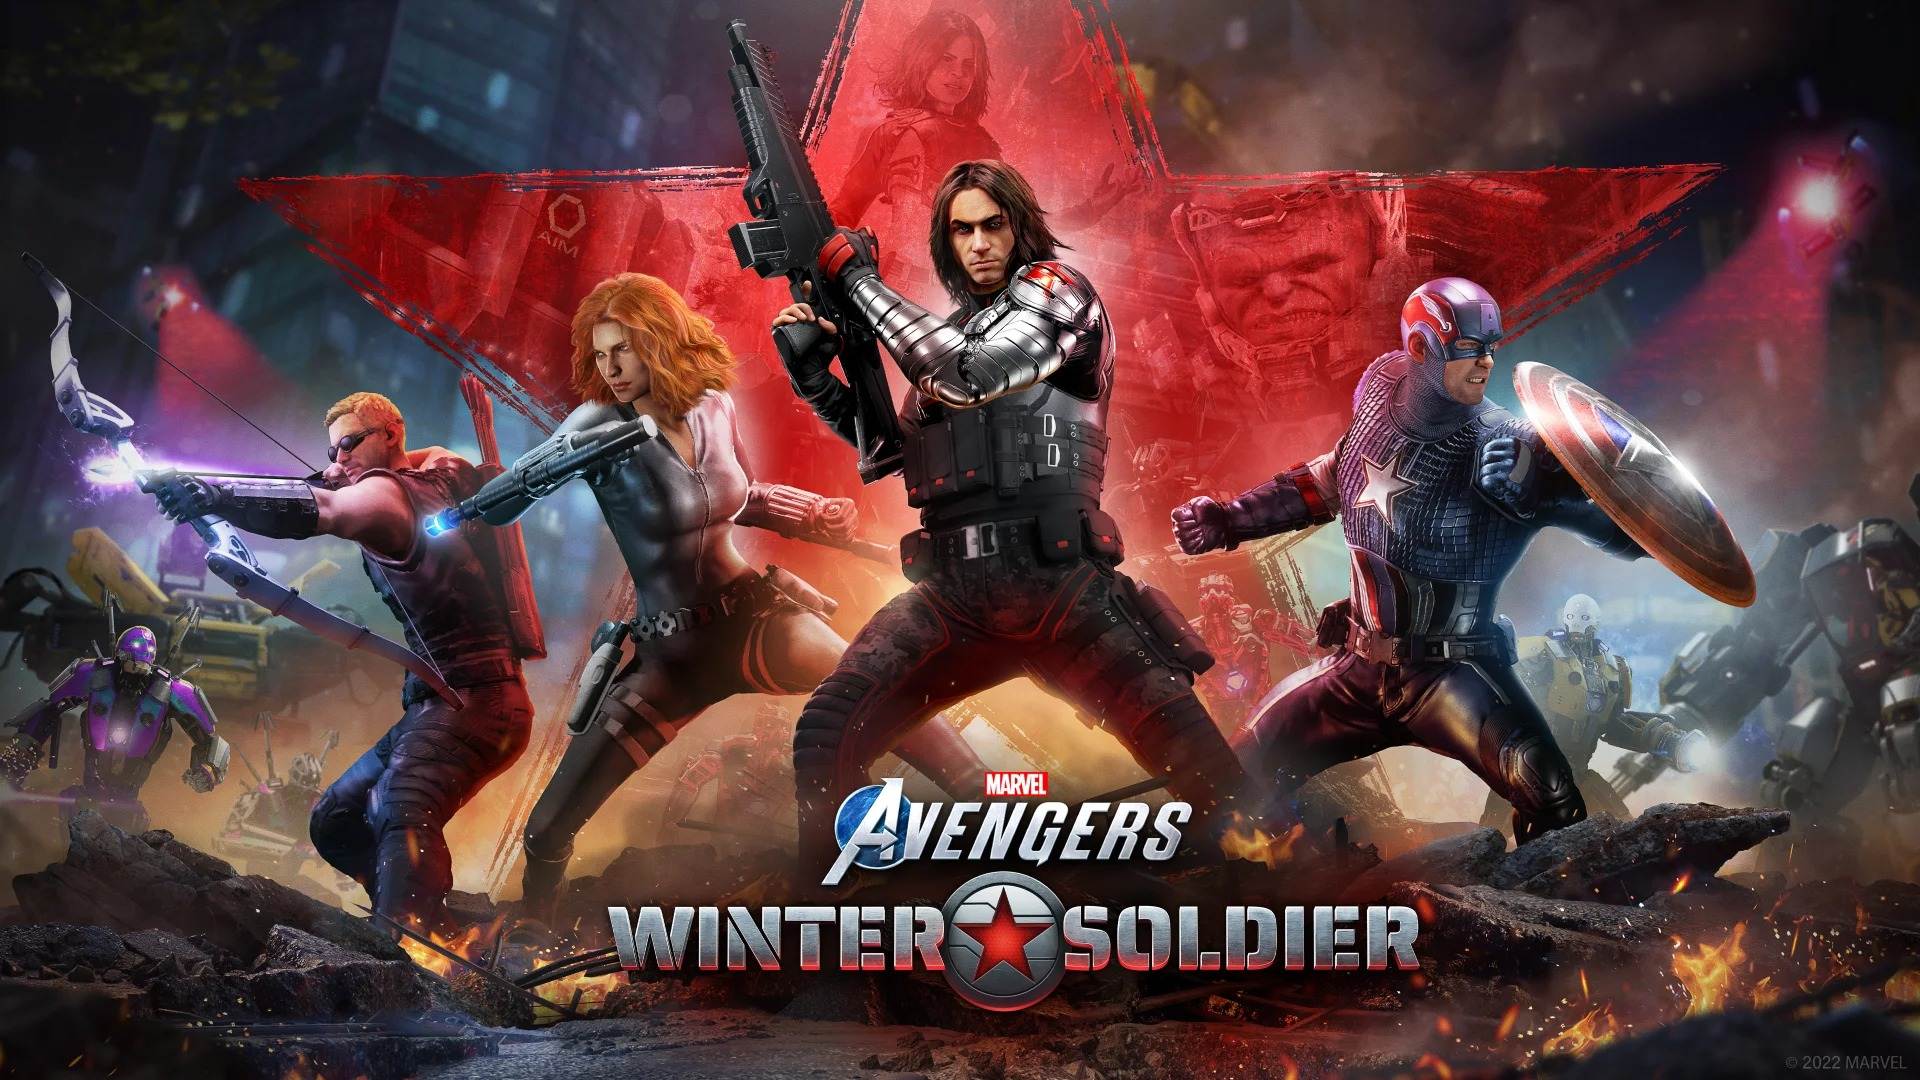 Marvel’s Avengers adds the Winter Soldier later this month